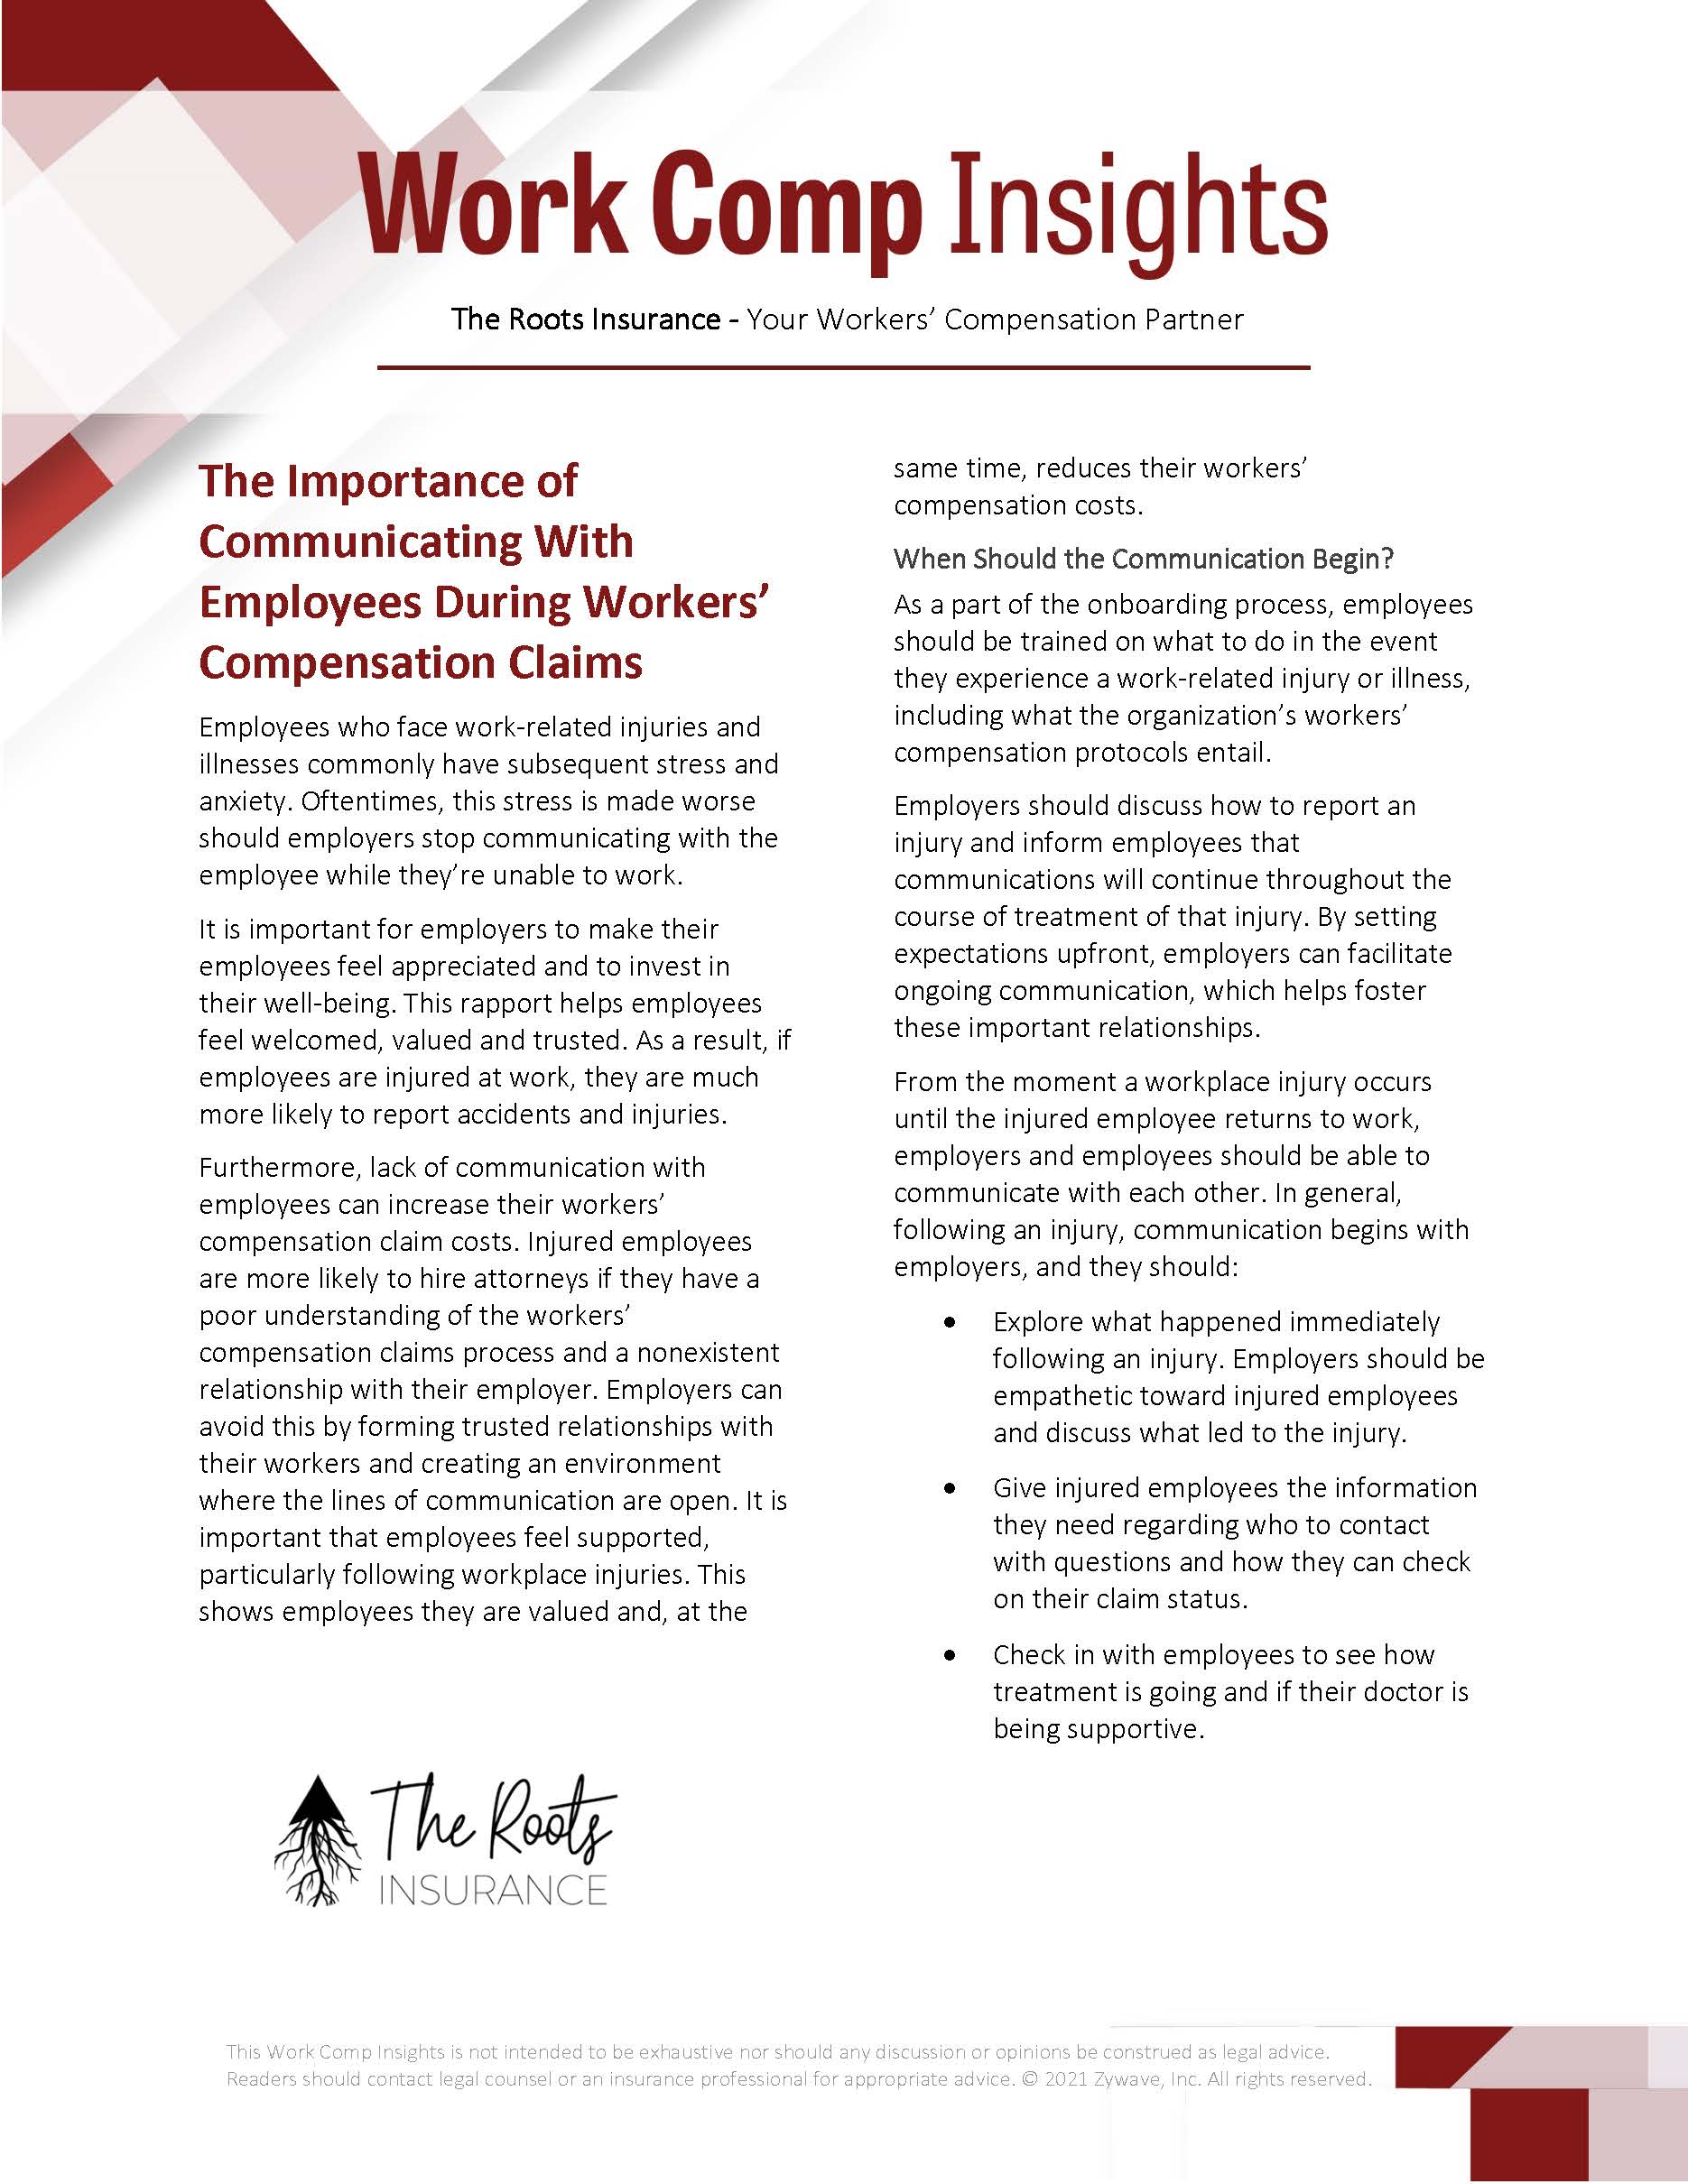 Work Comp Insights - The Importance of Communicating With Employees During Workers' Compensation Claims